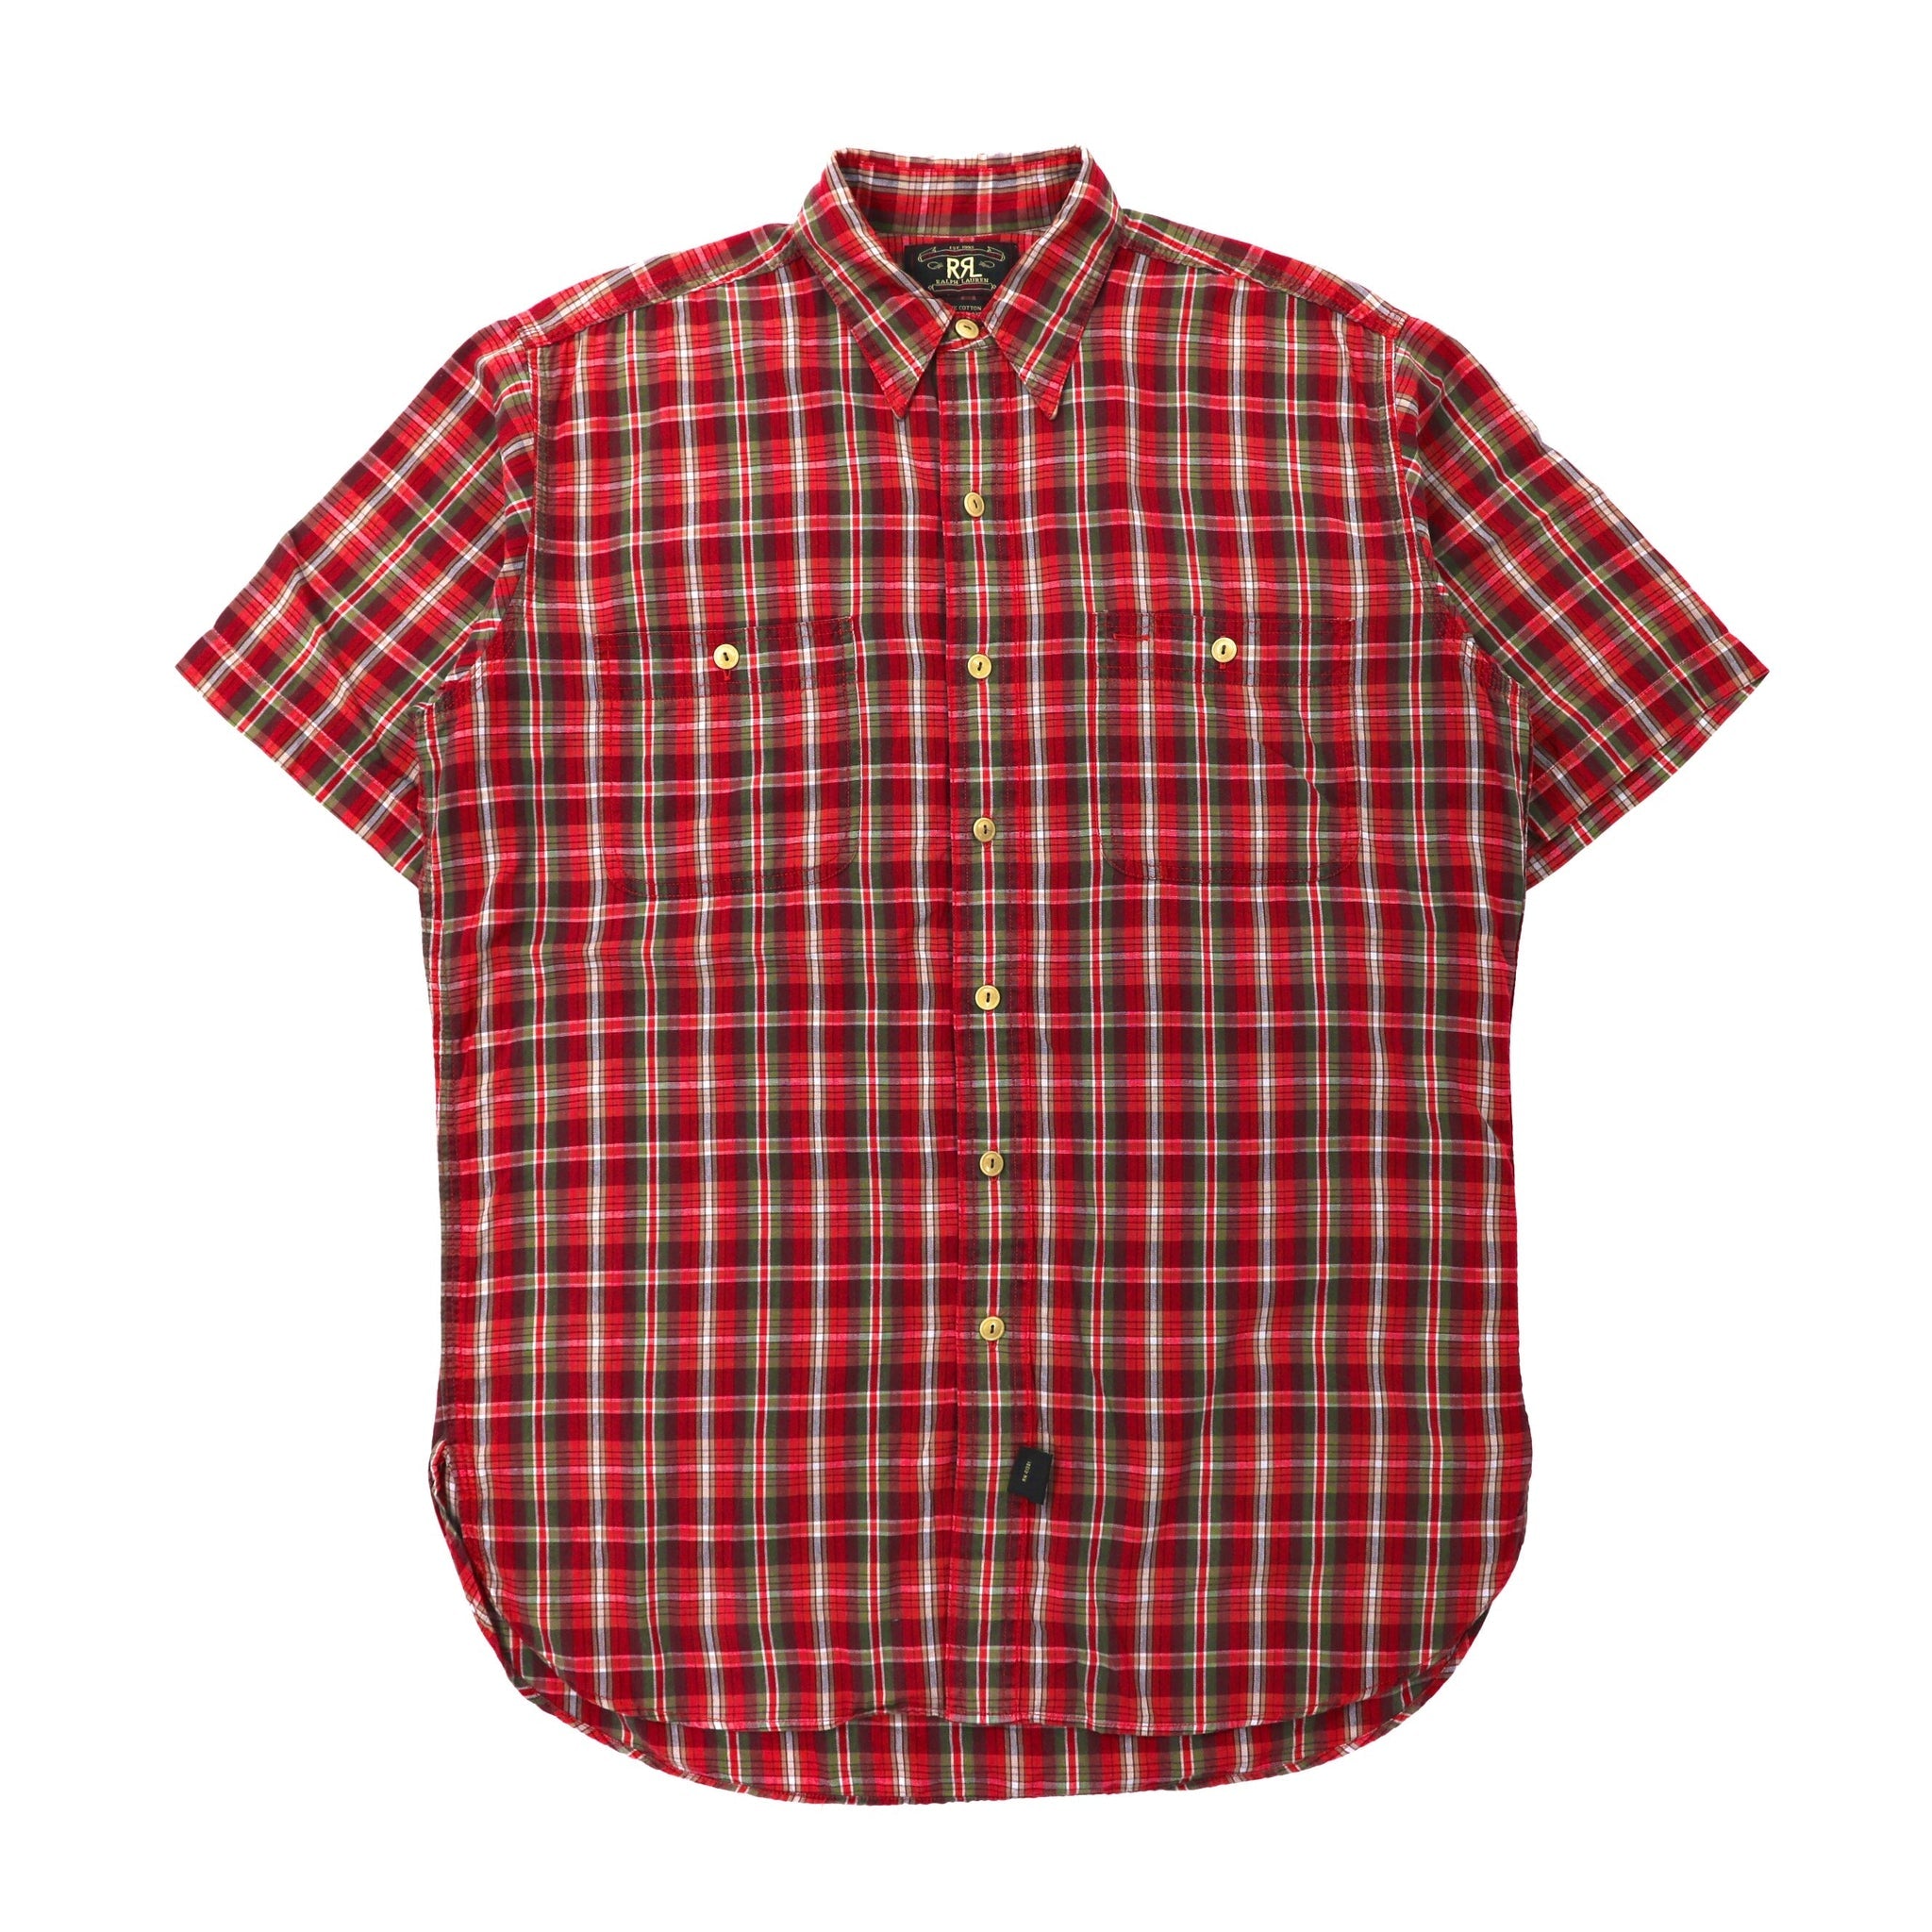 RRL short-sleeved shirt S red Checked cotton first term three star tag 